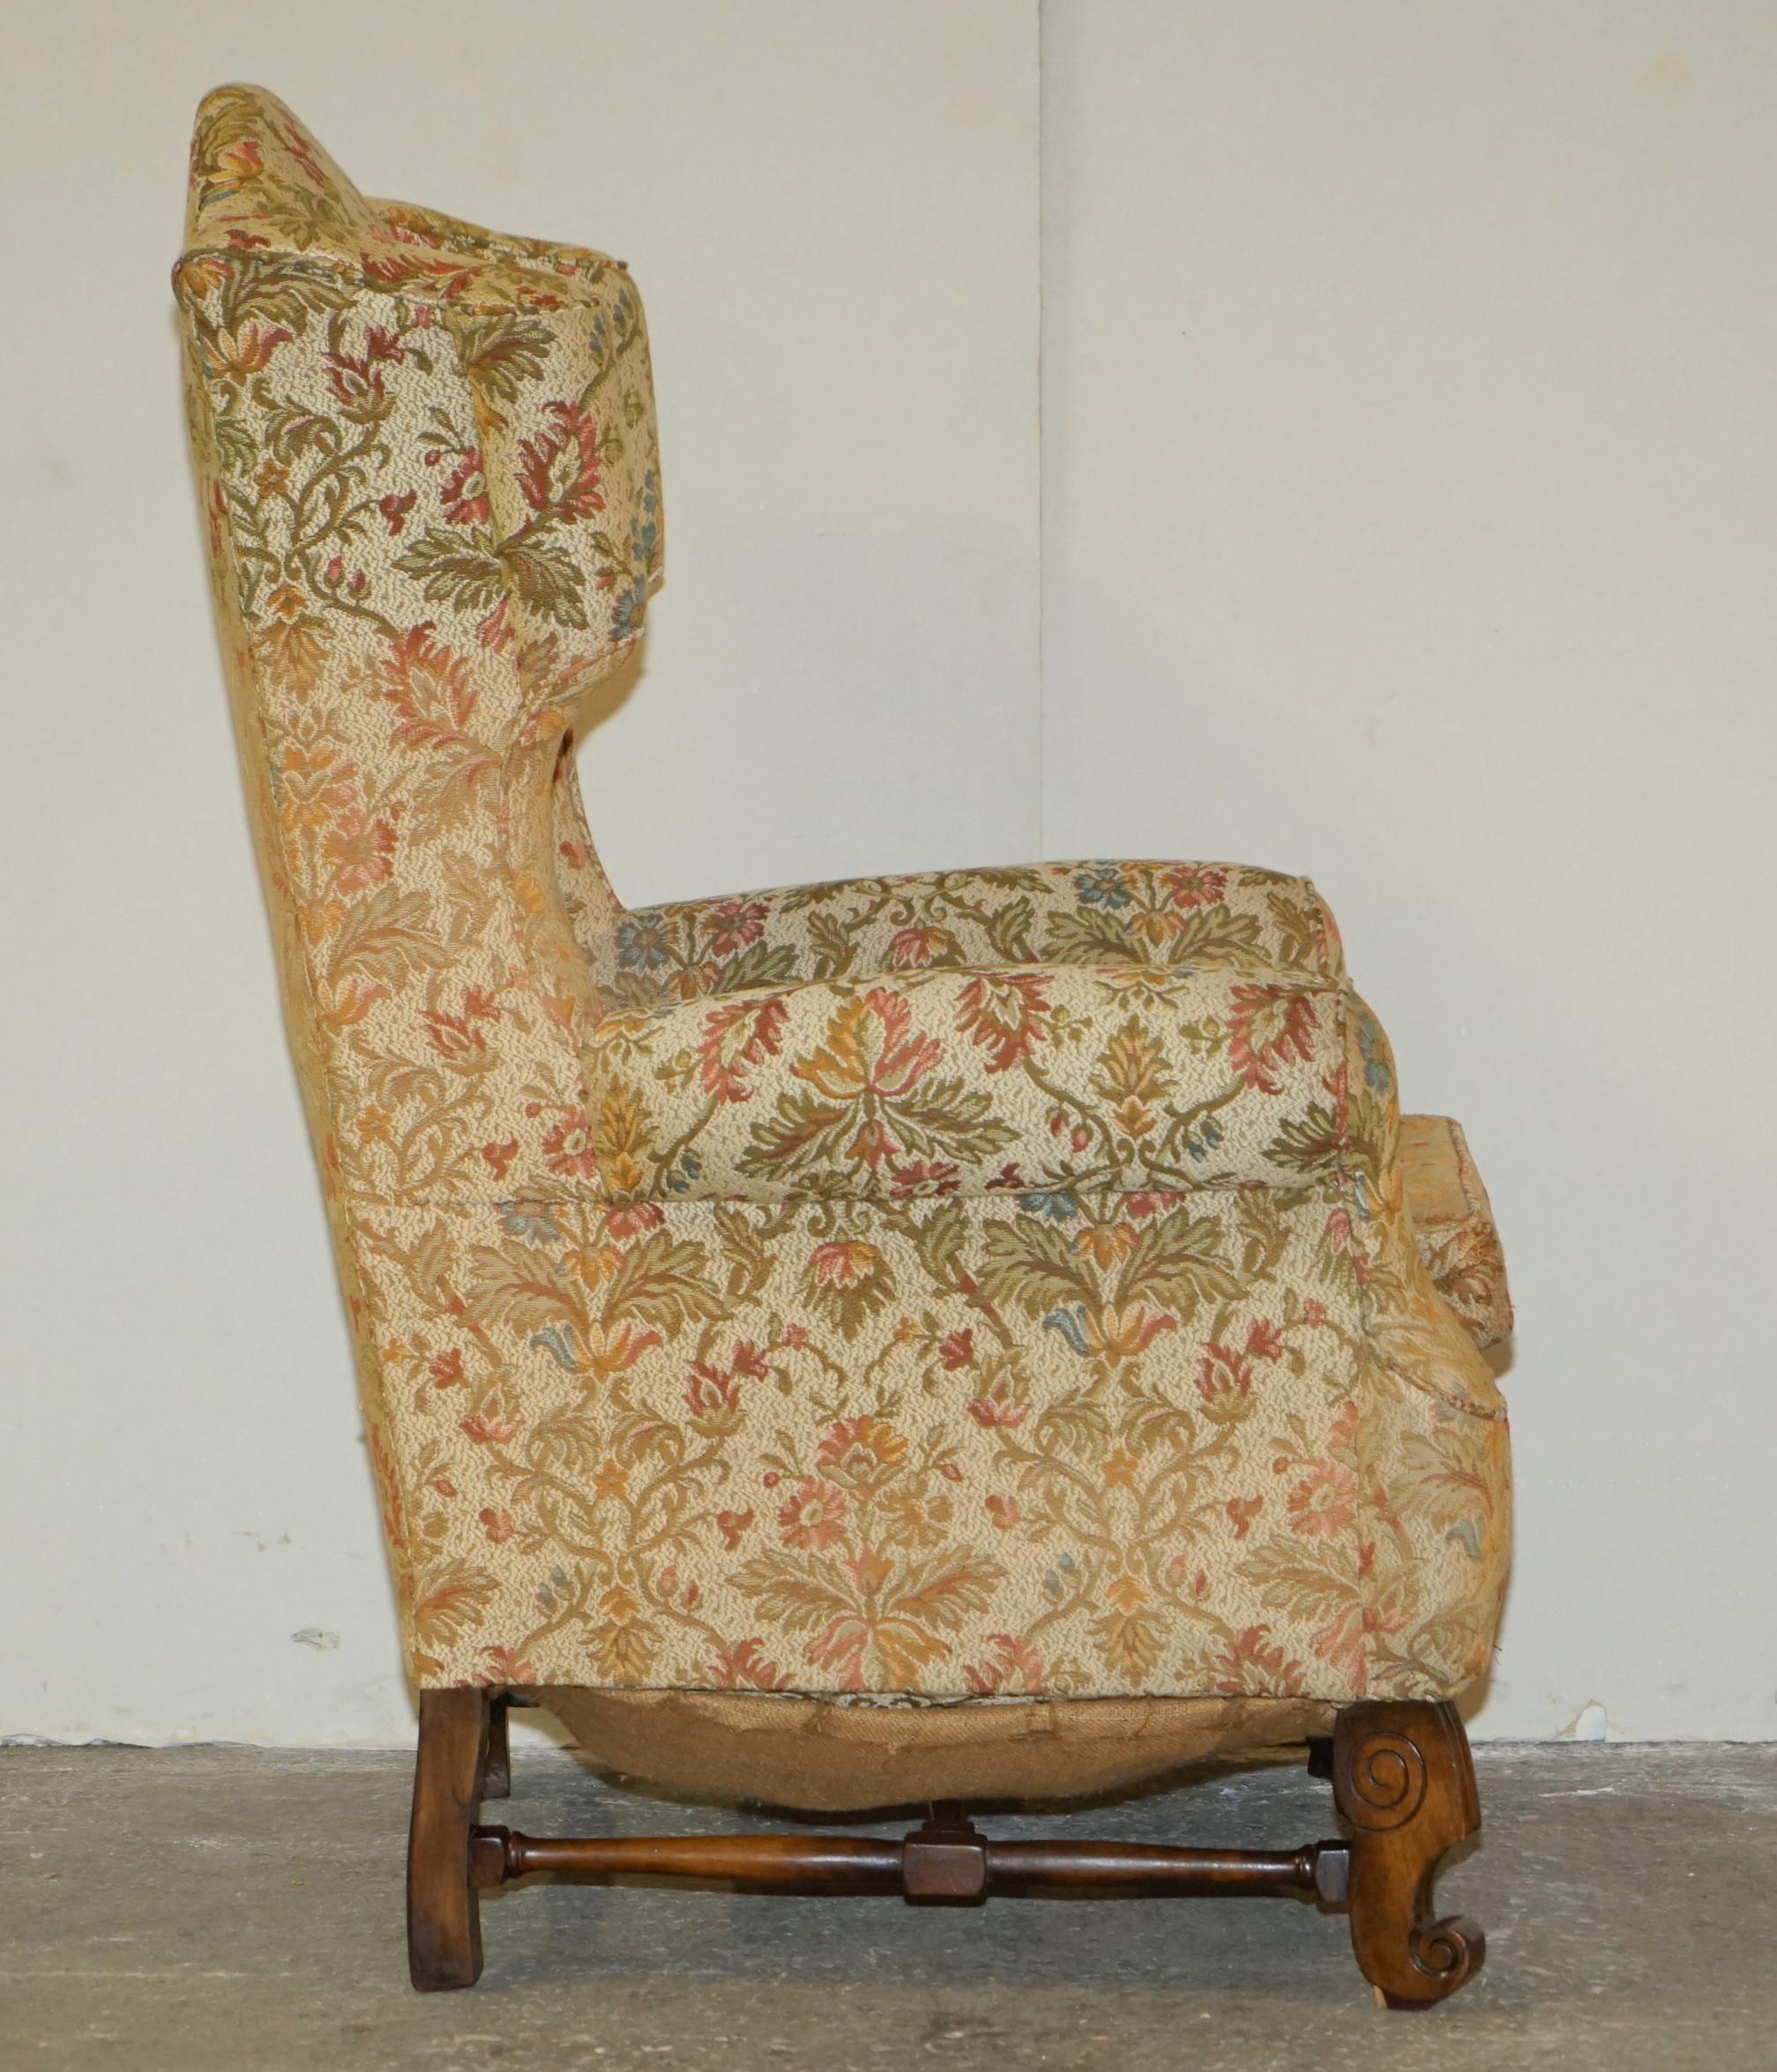 PAIR OF ANTIQUE ITALIAN CAROLEAN HIGH BACK WiNGBACK ARMCHAIRS FOR UPHOLSTERY For Sale 11